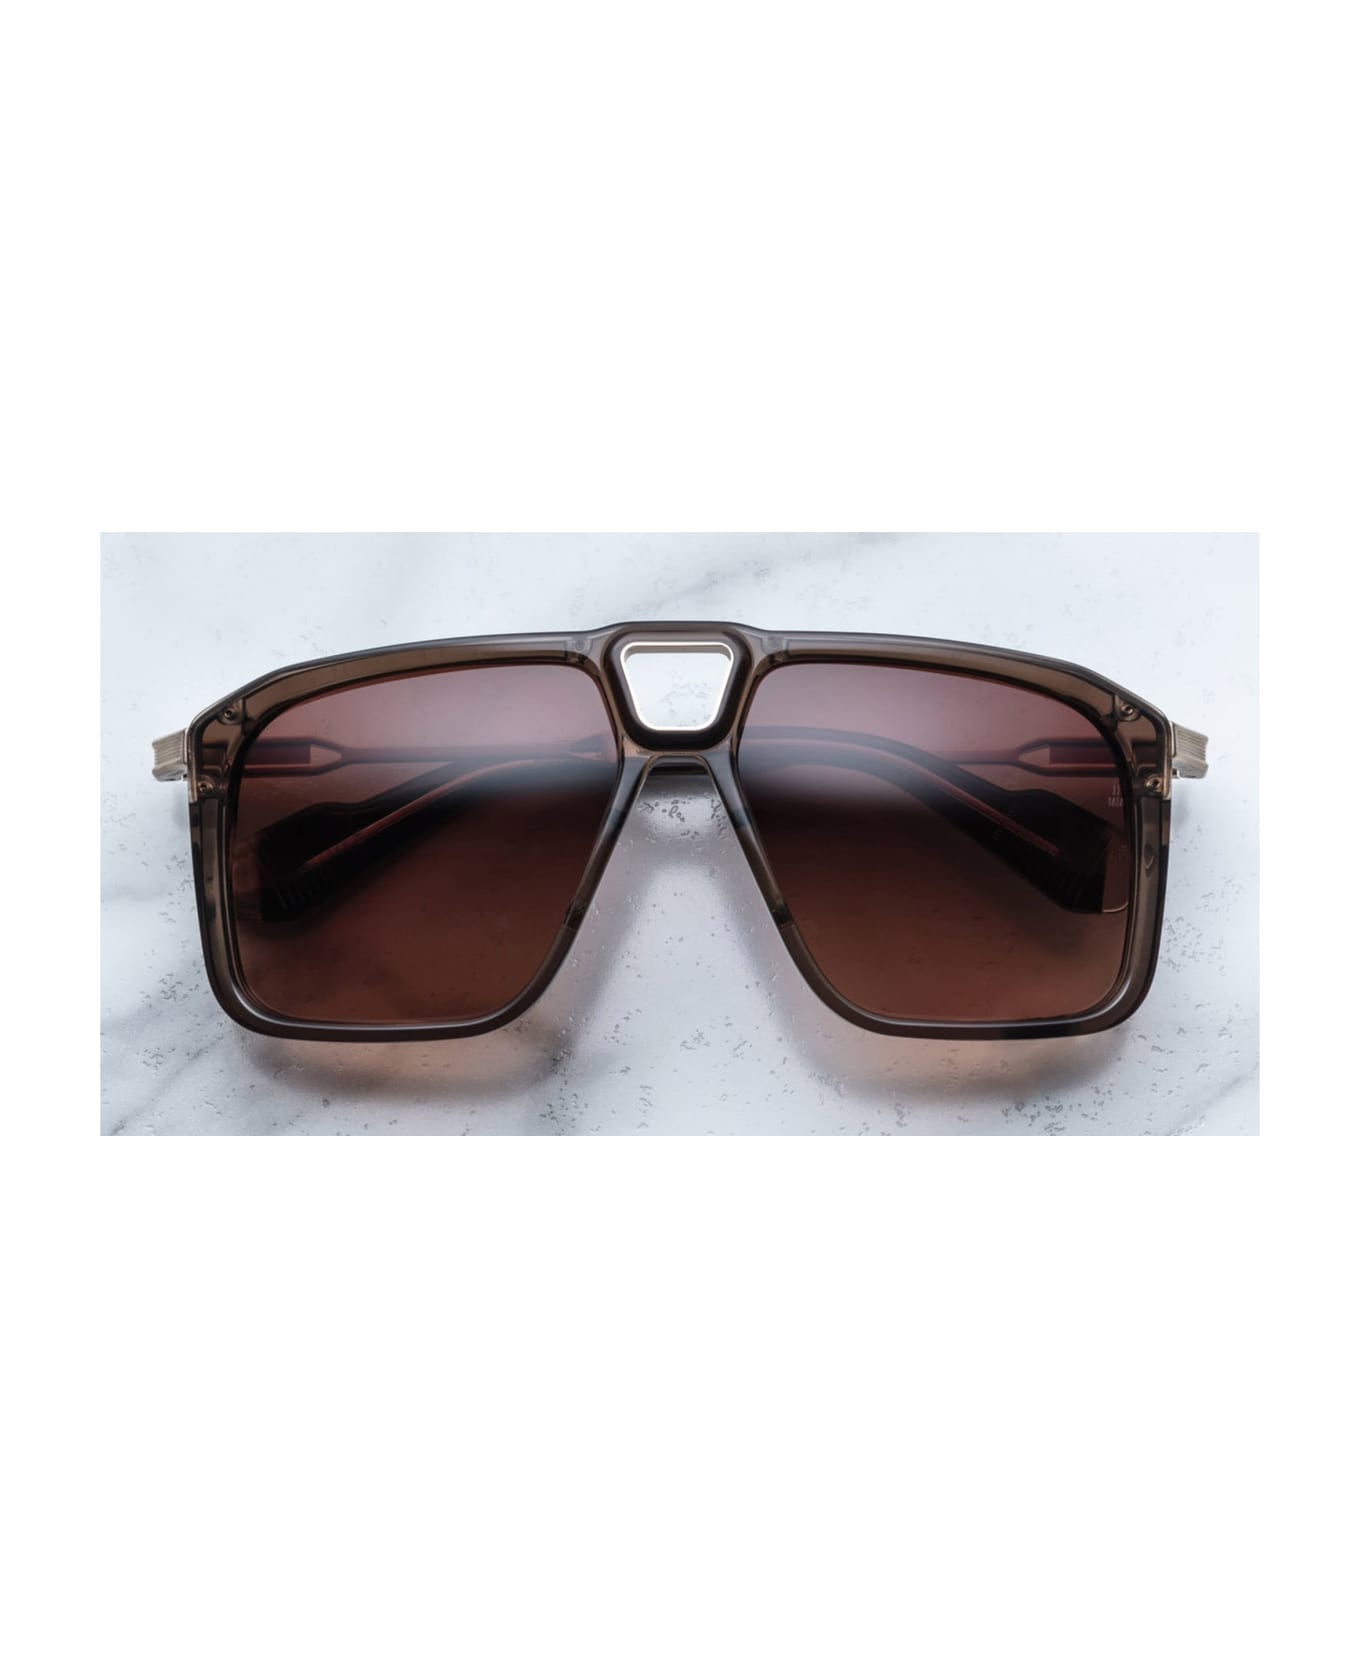 Jacques Marie Mage Savoy - London Sunglasses - brown